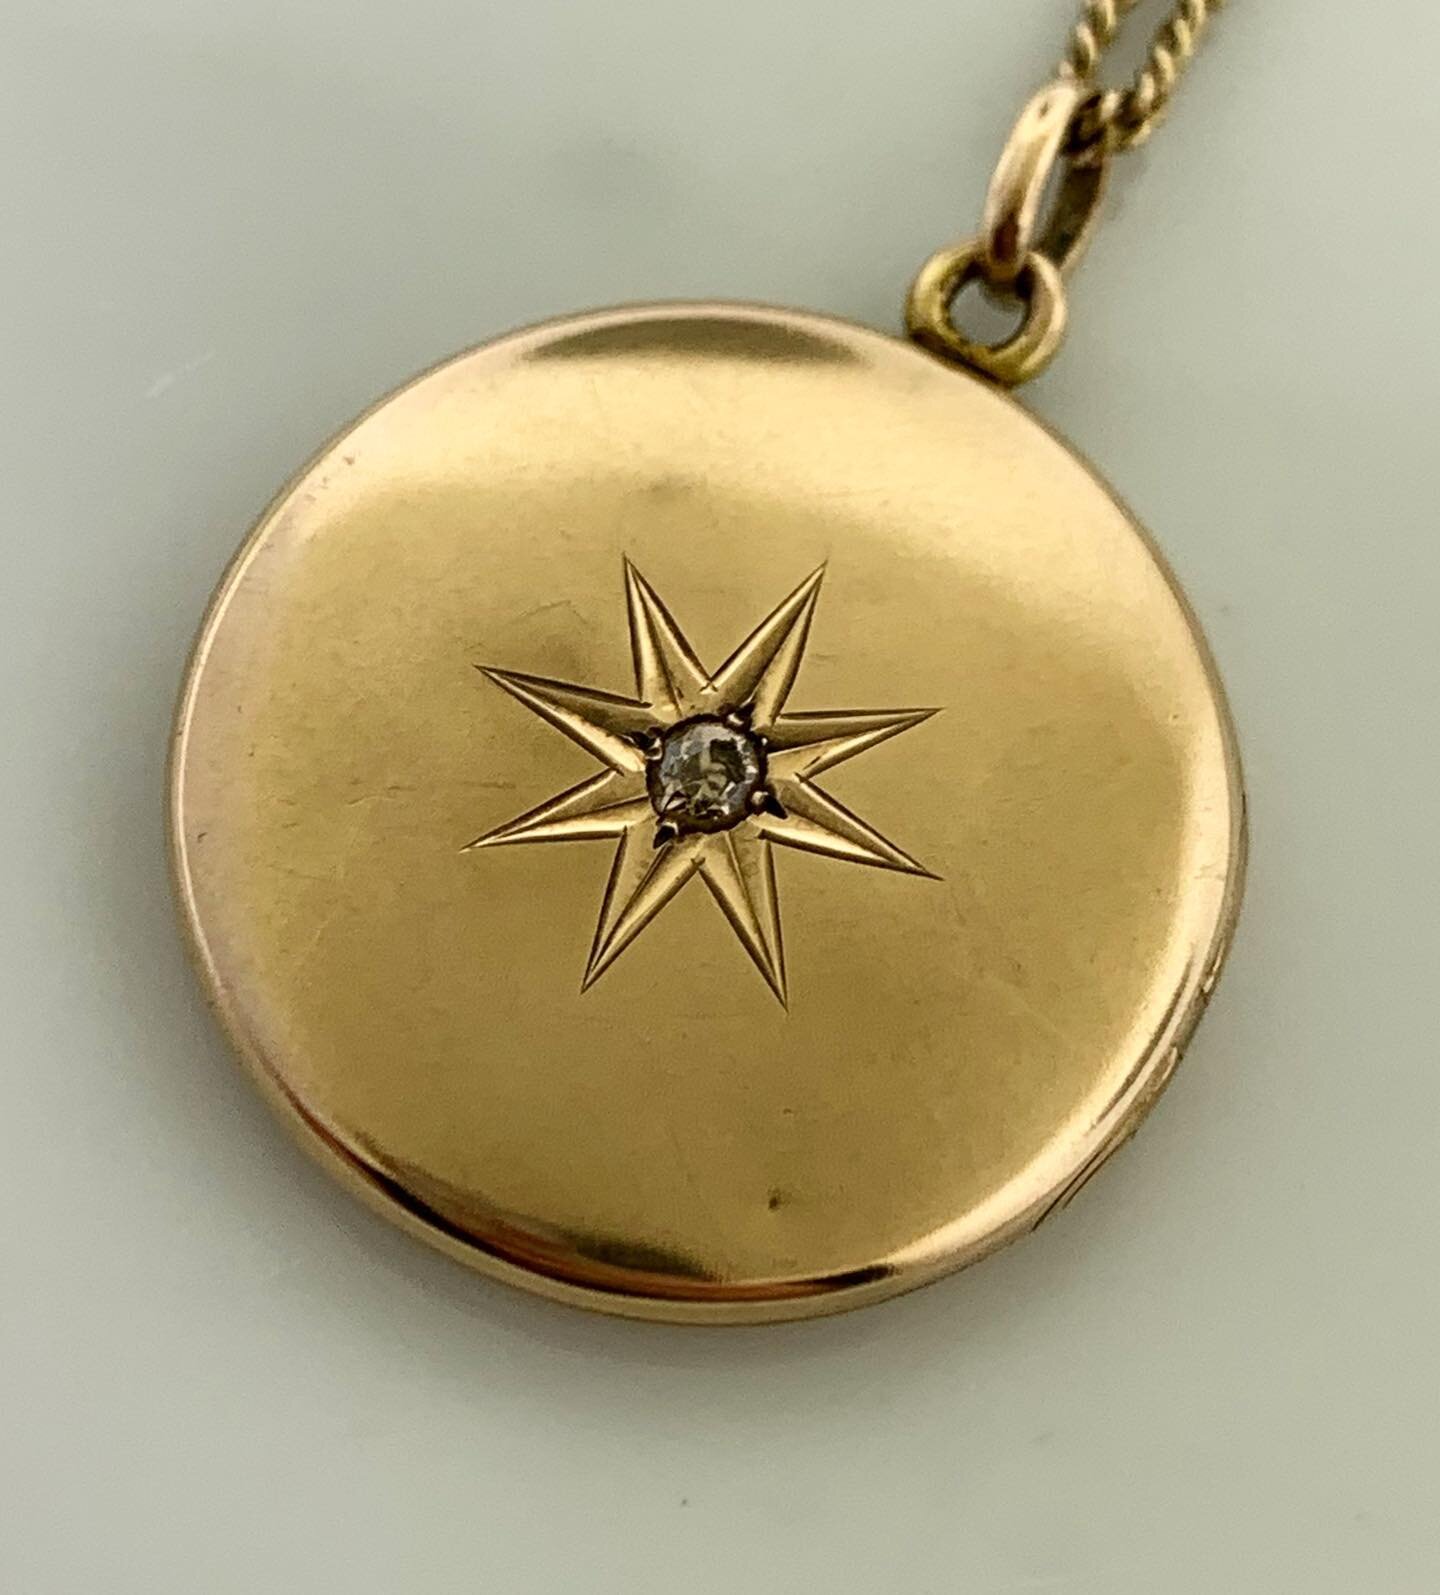 Vintage 10k Yellow Gold Star Set 0.12ct Old Mine Cut Locket, 1&rdquo; 

Chain sold separately.

DM to inquire